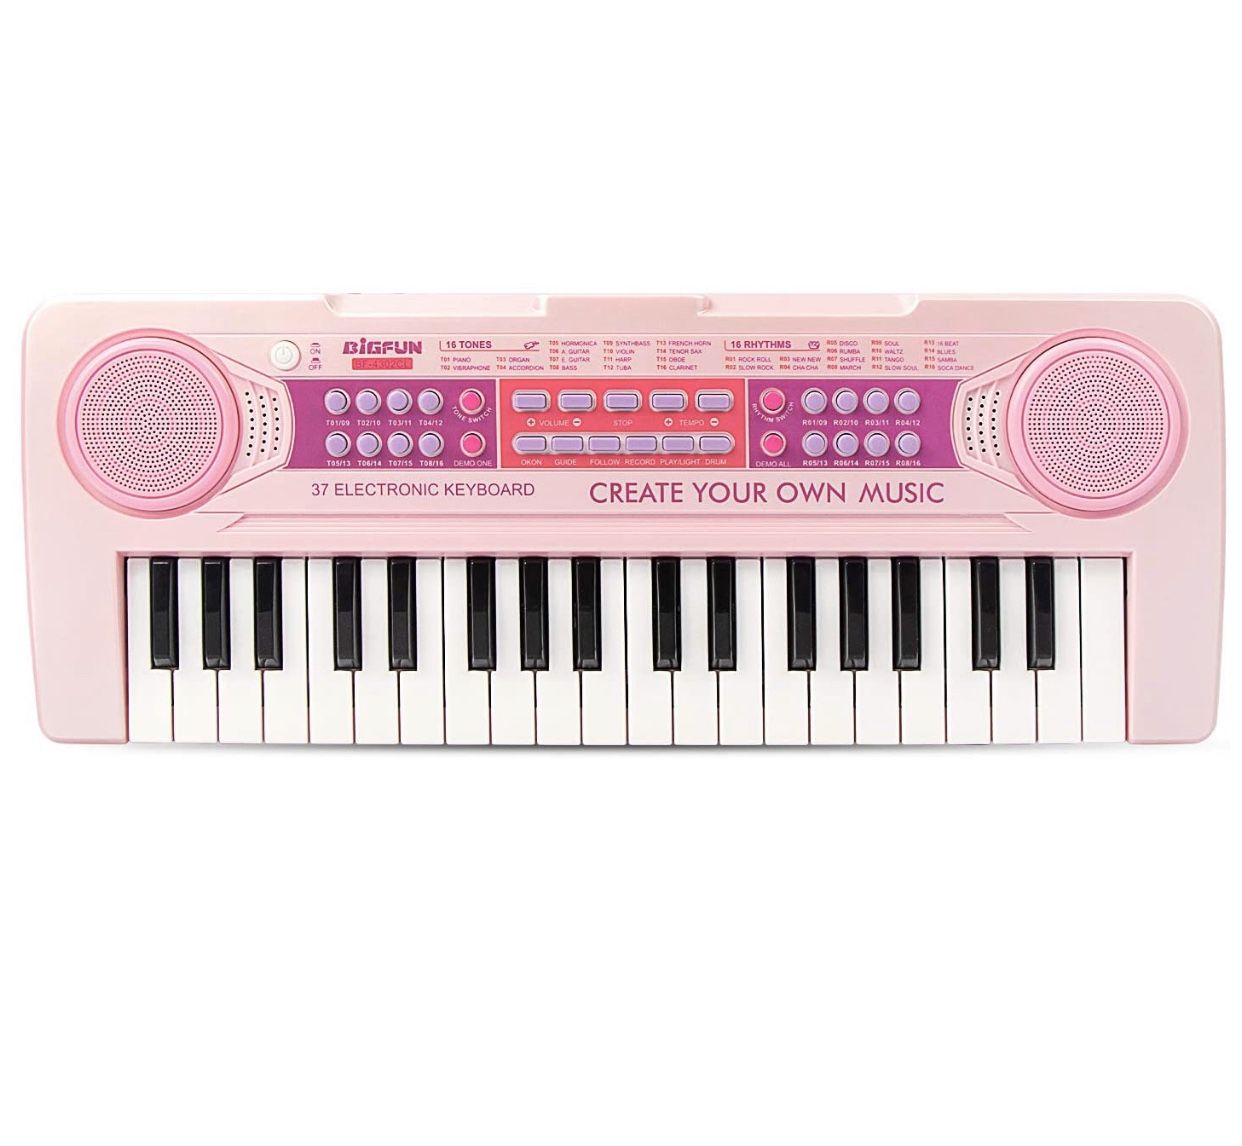 37 Keys Multifunction Portable Electronic Kids Piano Musical Teaching Keyboard for Kids Children Early Learning Educational Toy with Double Speakers